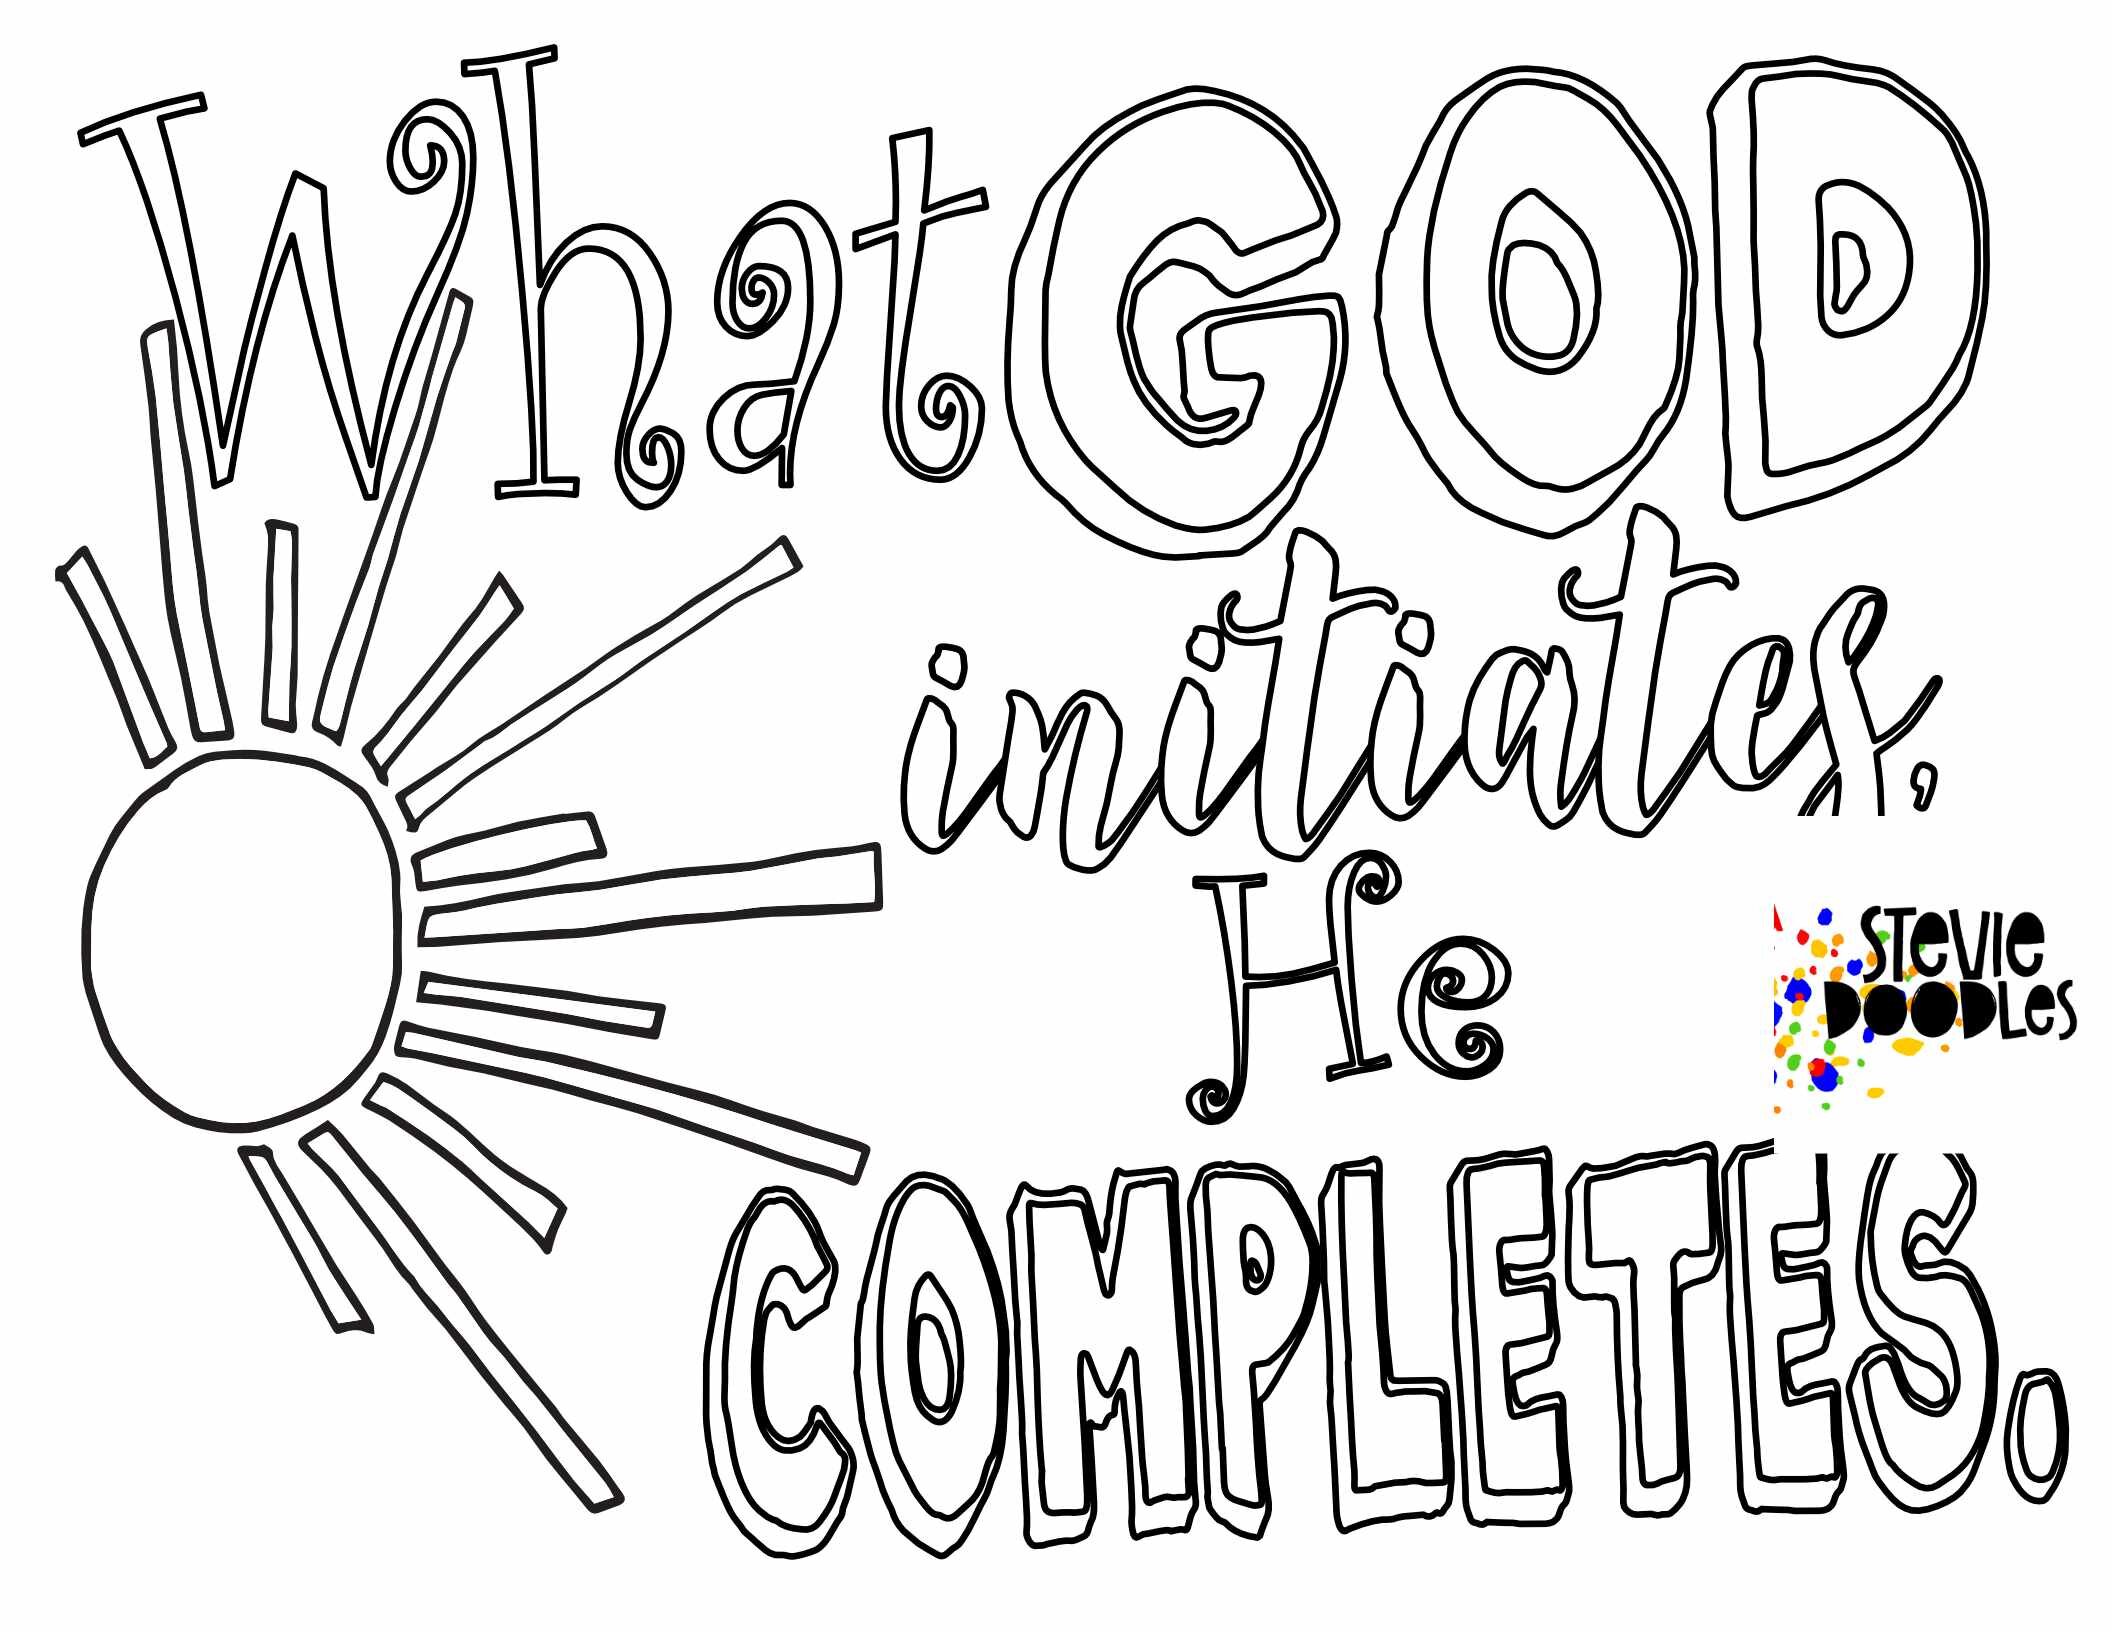 5 Christian Coloring Pages Inspired by Experiencing God Unit 4